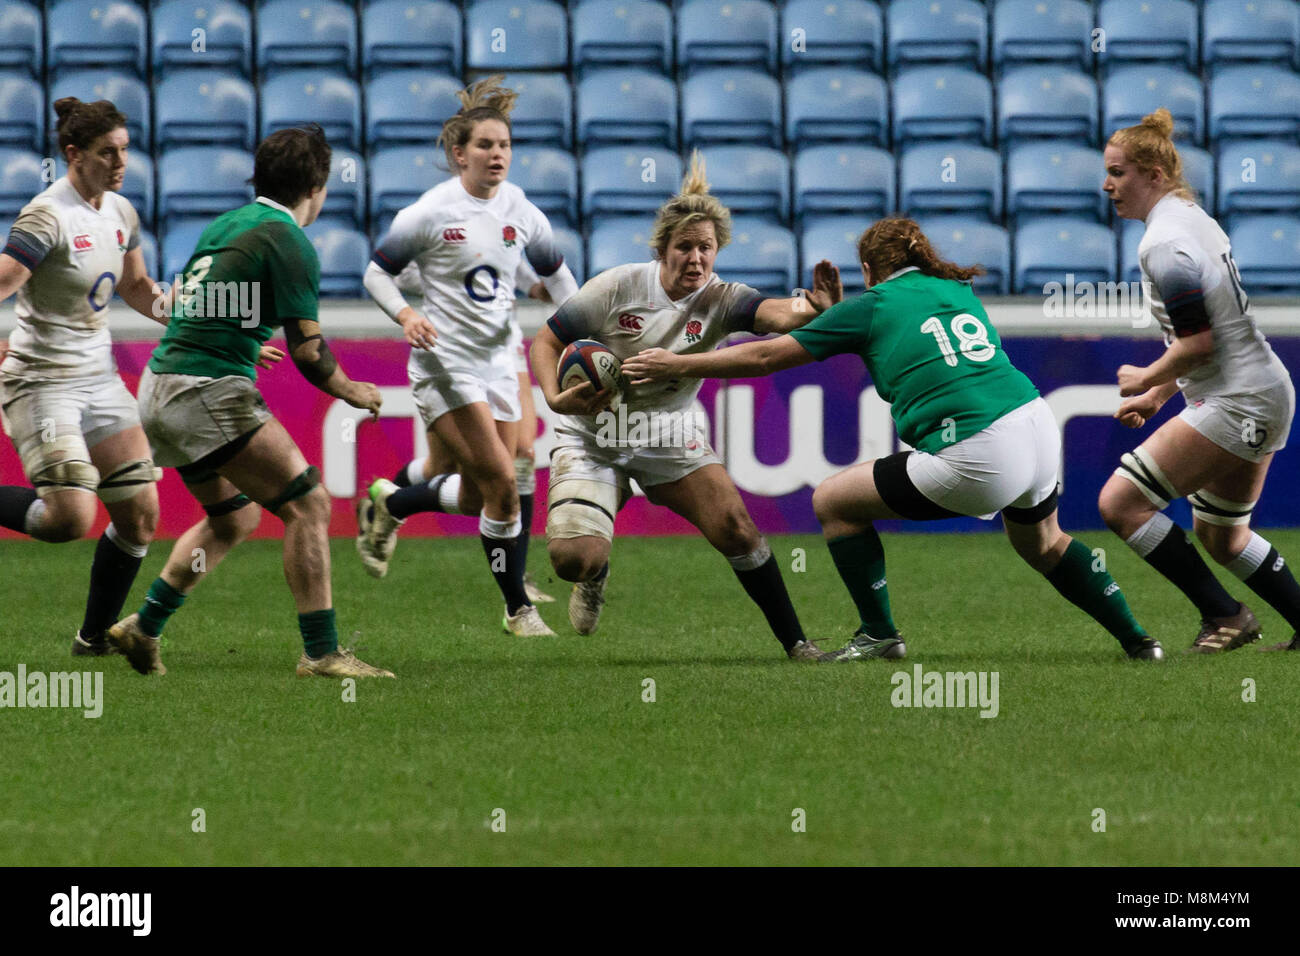 Coventry, UK. 16th Mar, 2018. In the Women's 6 Nations match between England and Ireland, 16th March 2018 at the Ricoh Stadium.  England would go on to win the match 33-11, France women would achieve the Grand Slam and the result would see England achieve 2nd place. Credit: Darryl Godden/Alamy Live News Stock Photo